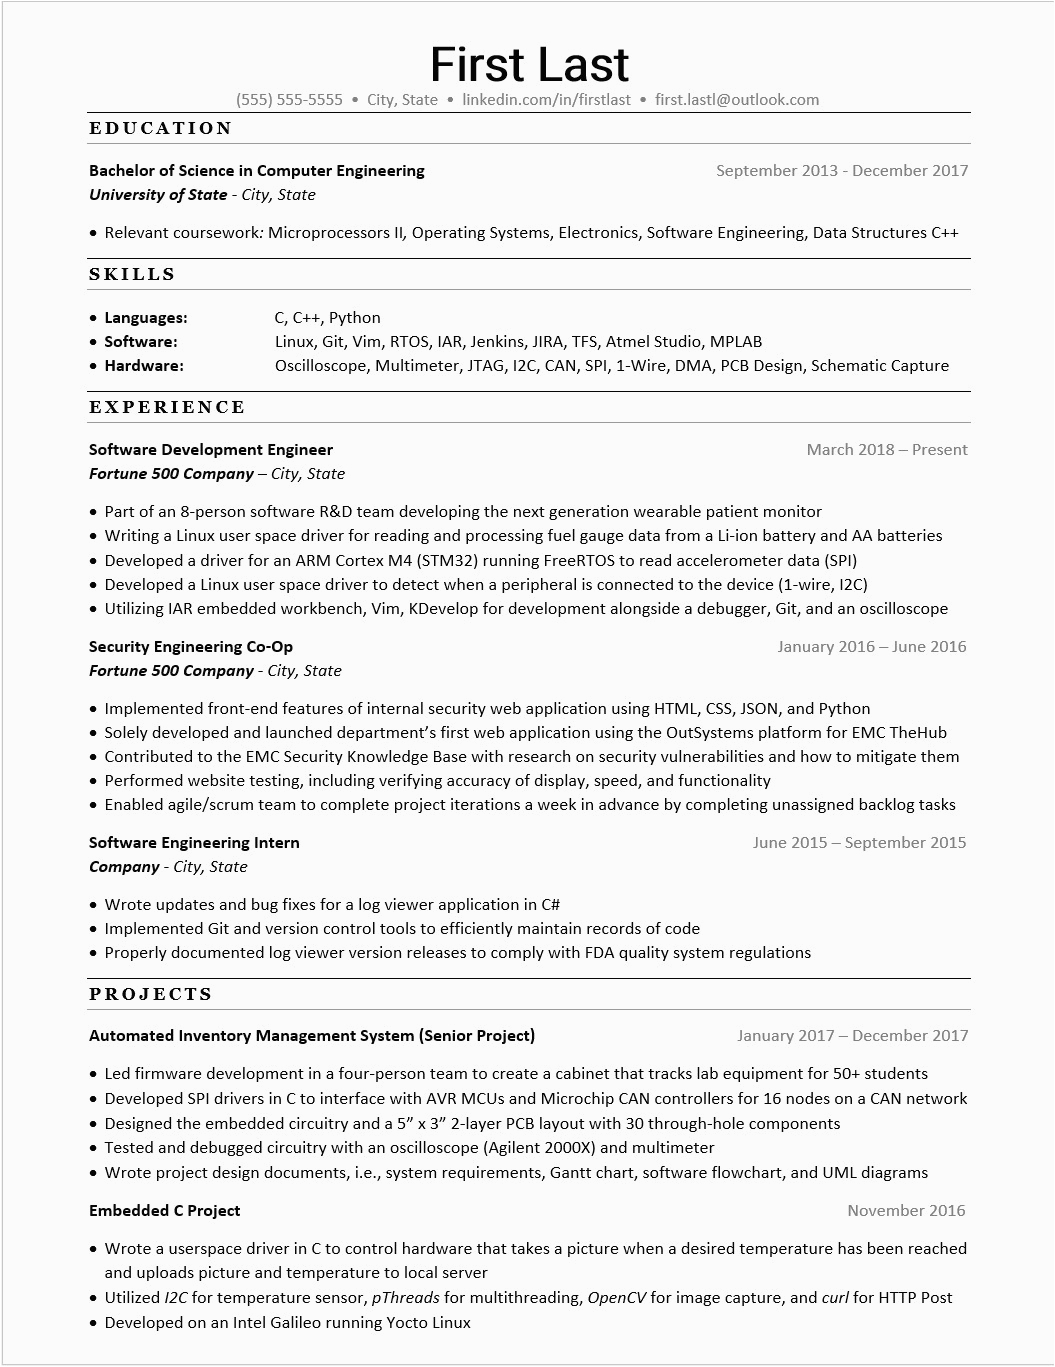 Experience Resume Sample for Embedded Engineer Embedded Engineer Resume 1 Year Experience